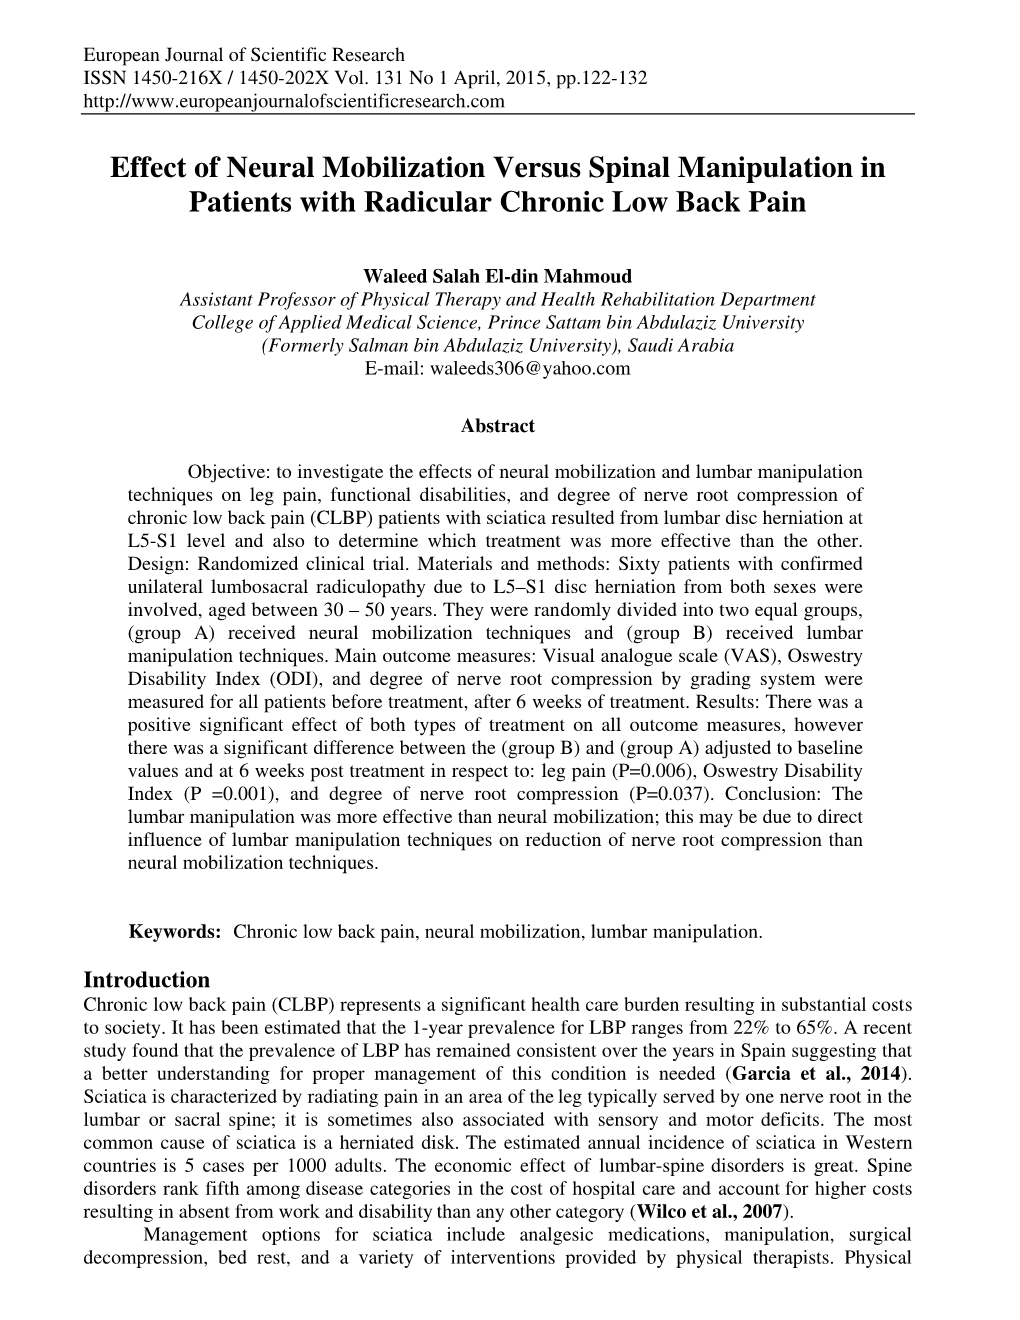 Effect of Neural Mobilization Versus Spinal Manipulation in Patients with Radicular Chronic Low Back Pain